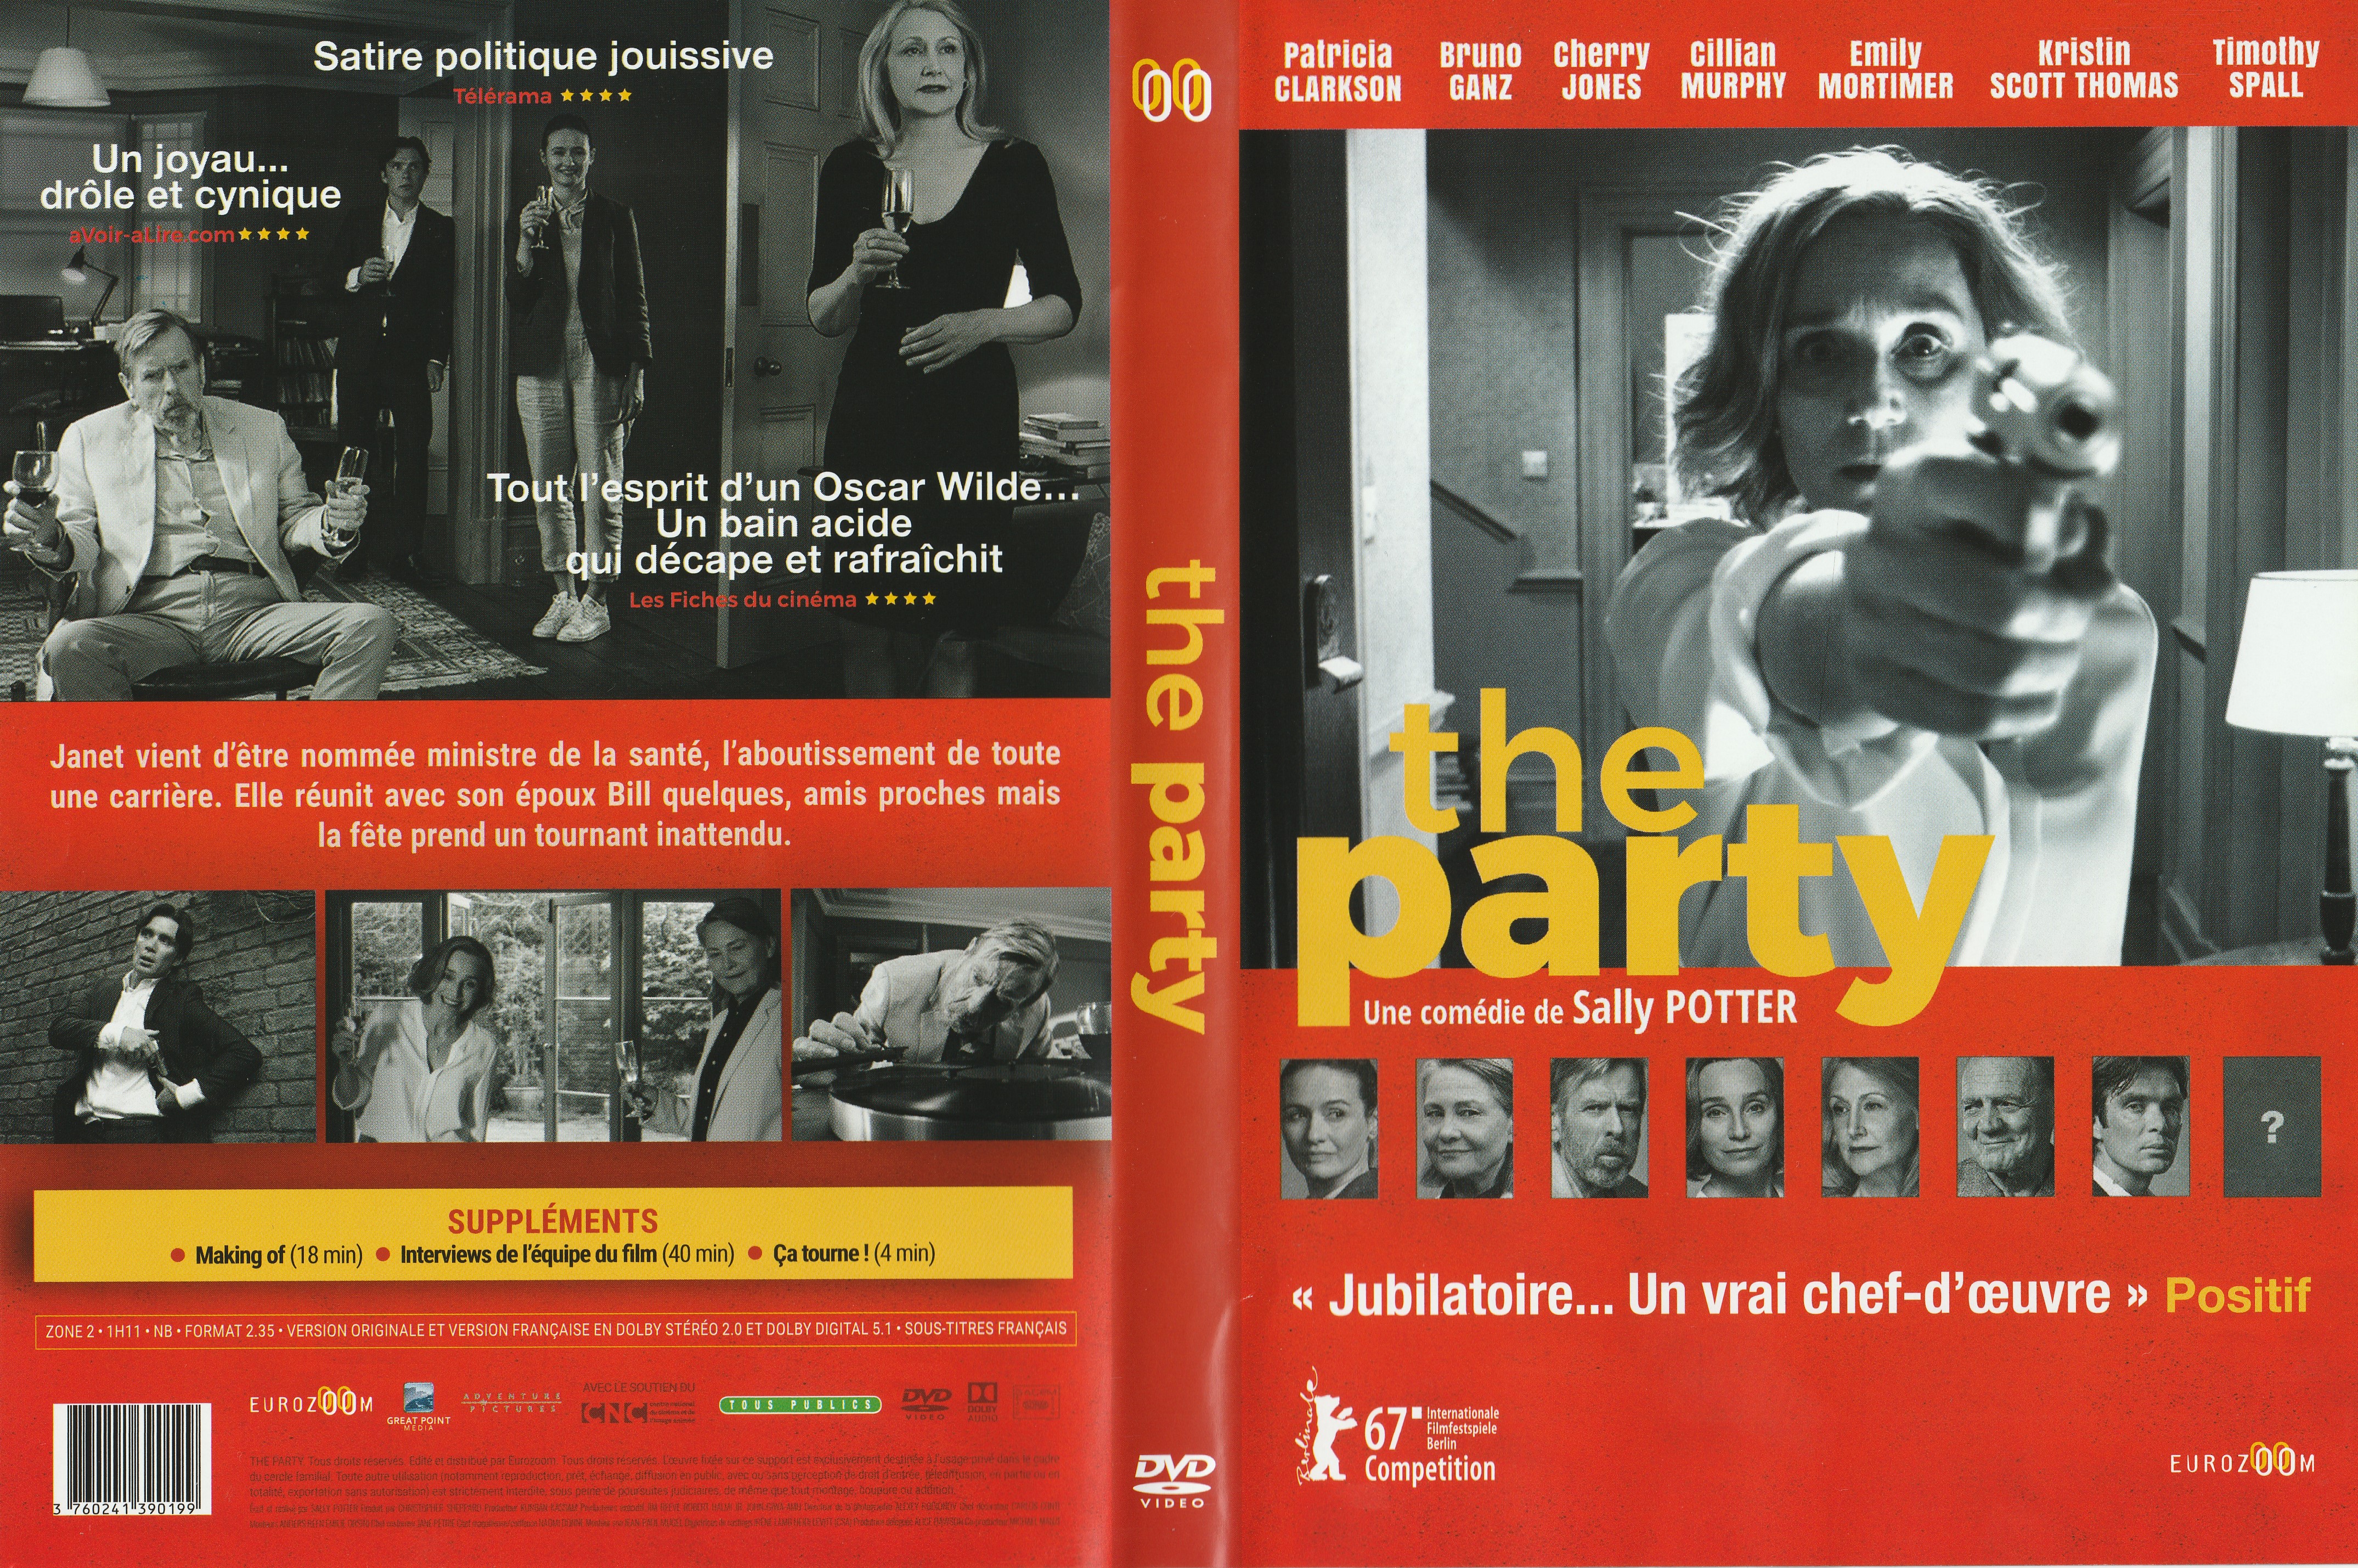 Jaquette DVD The party (2017)